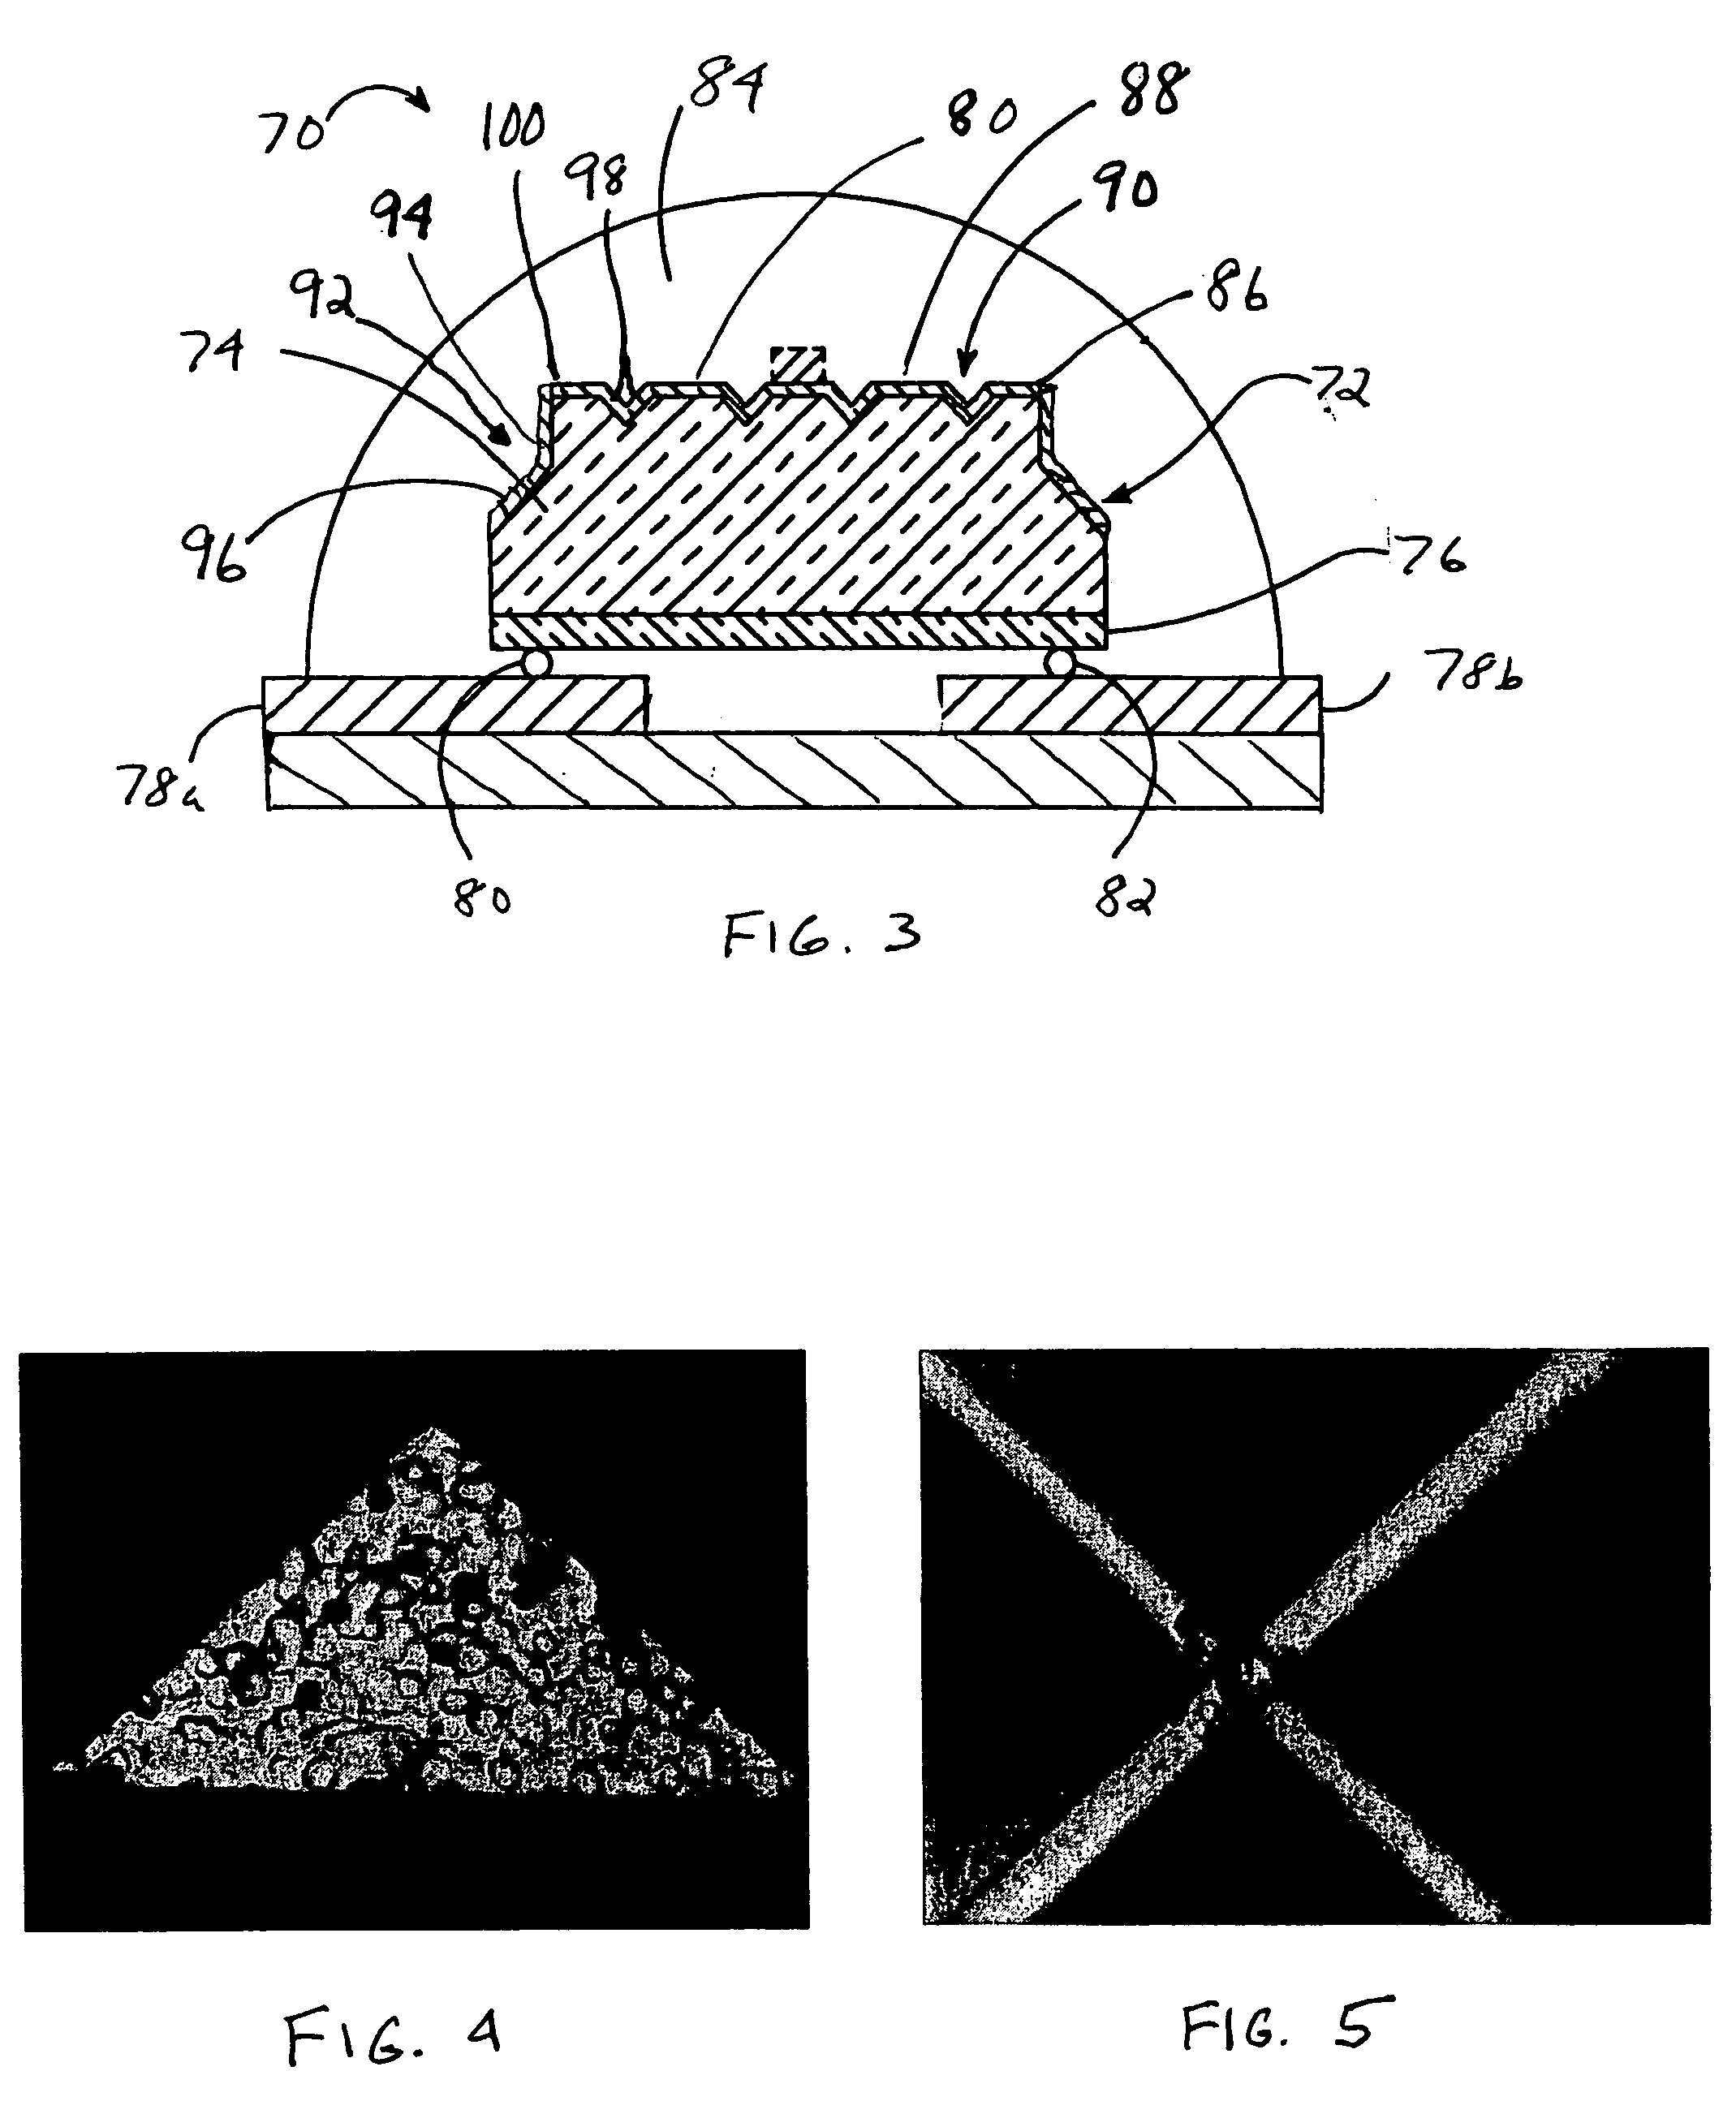 LED with substrate modifications for enhanced light extraction and method of making same